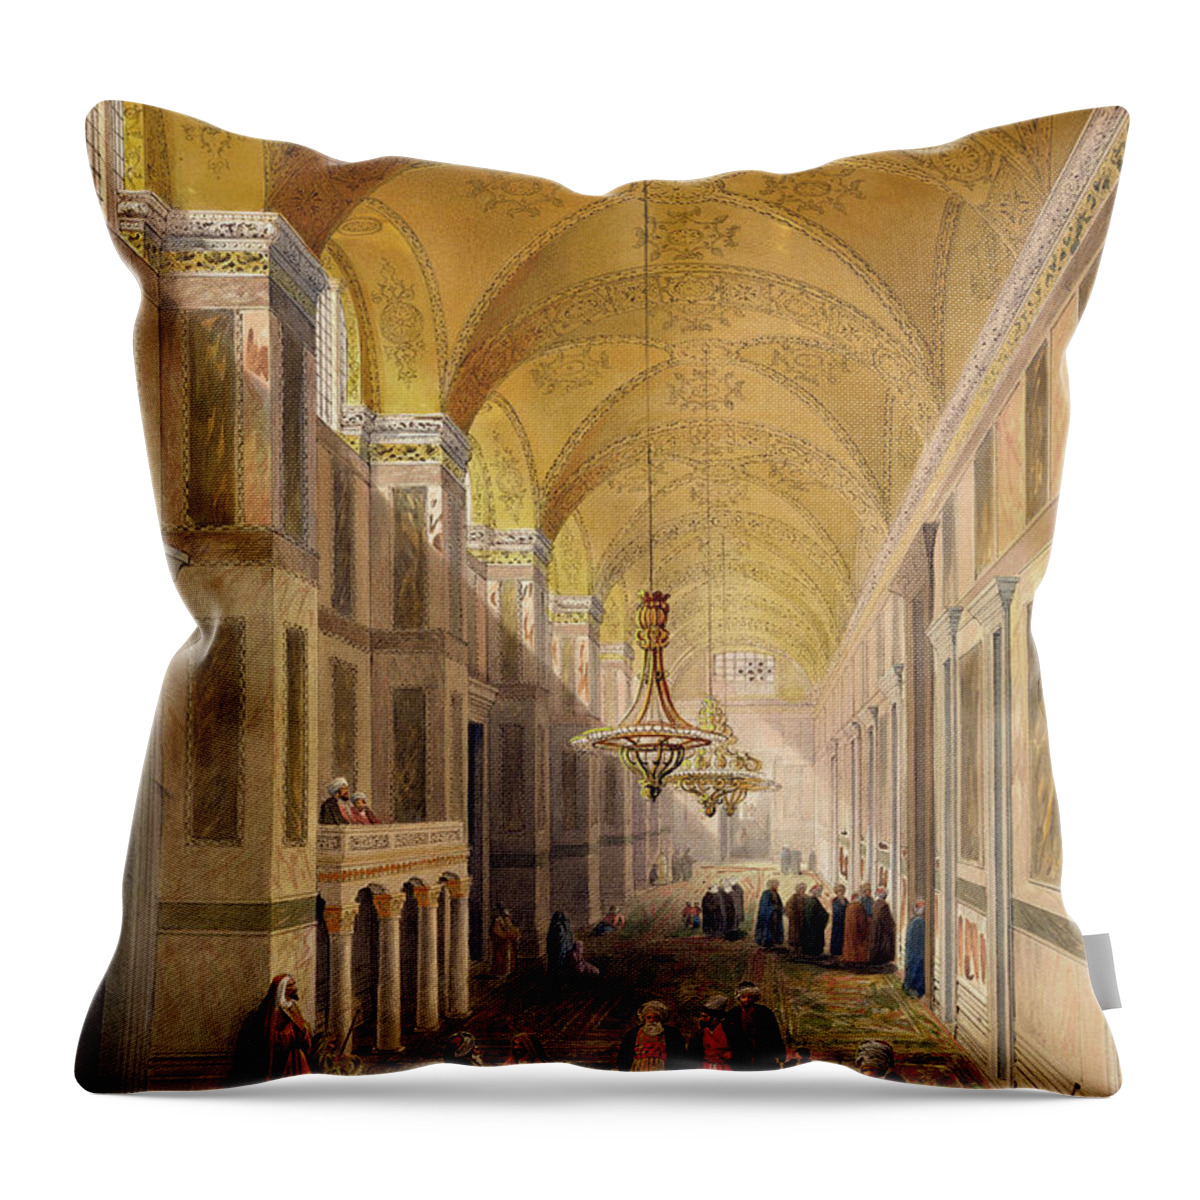 Corridor Throw Pillow featuring the drawing Haghia Sophia, Plate 2 The Narthex by Gaspard Fossati